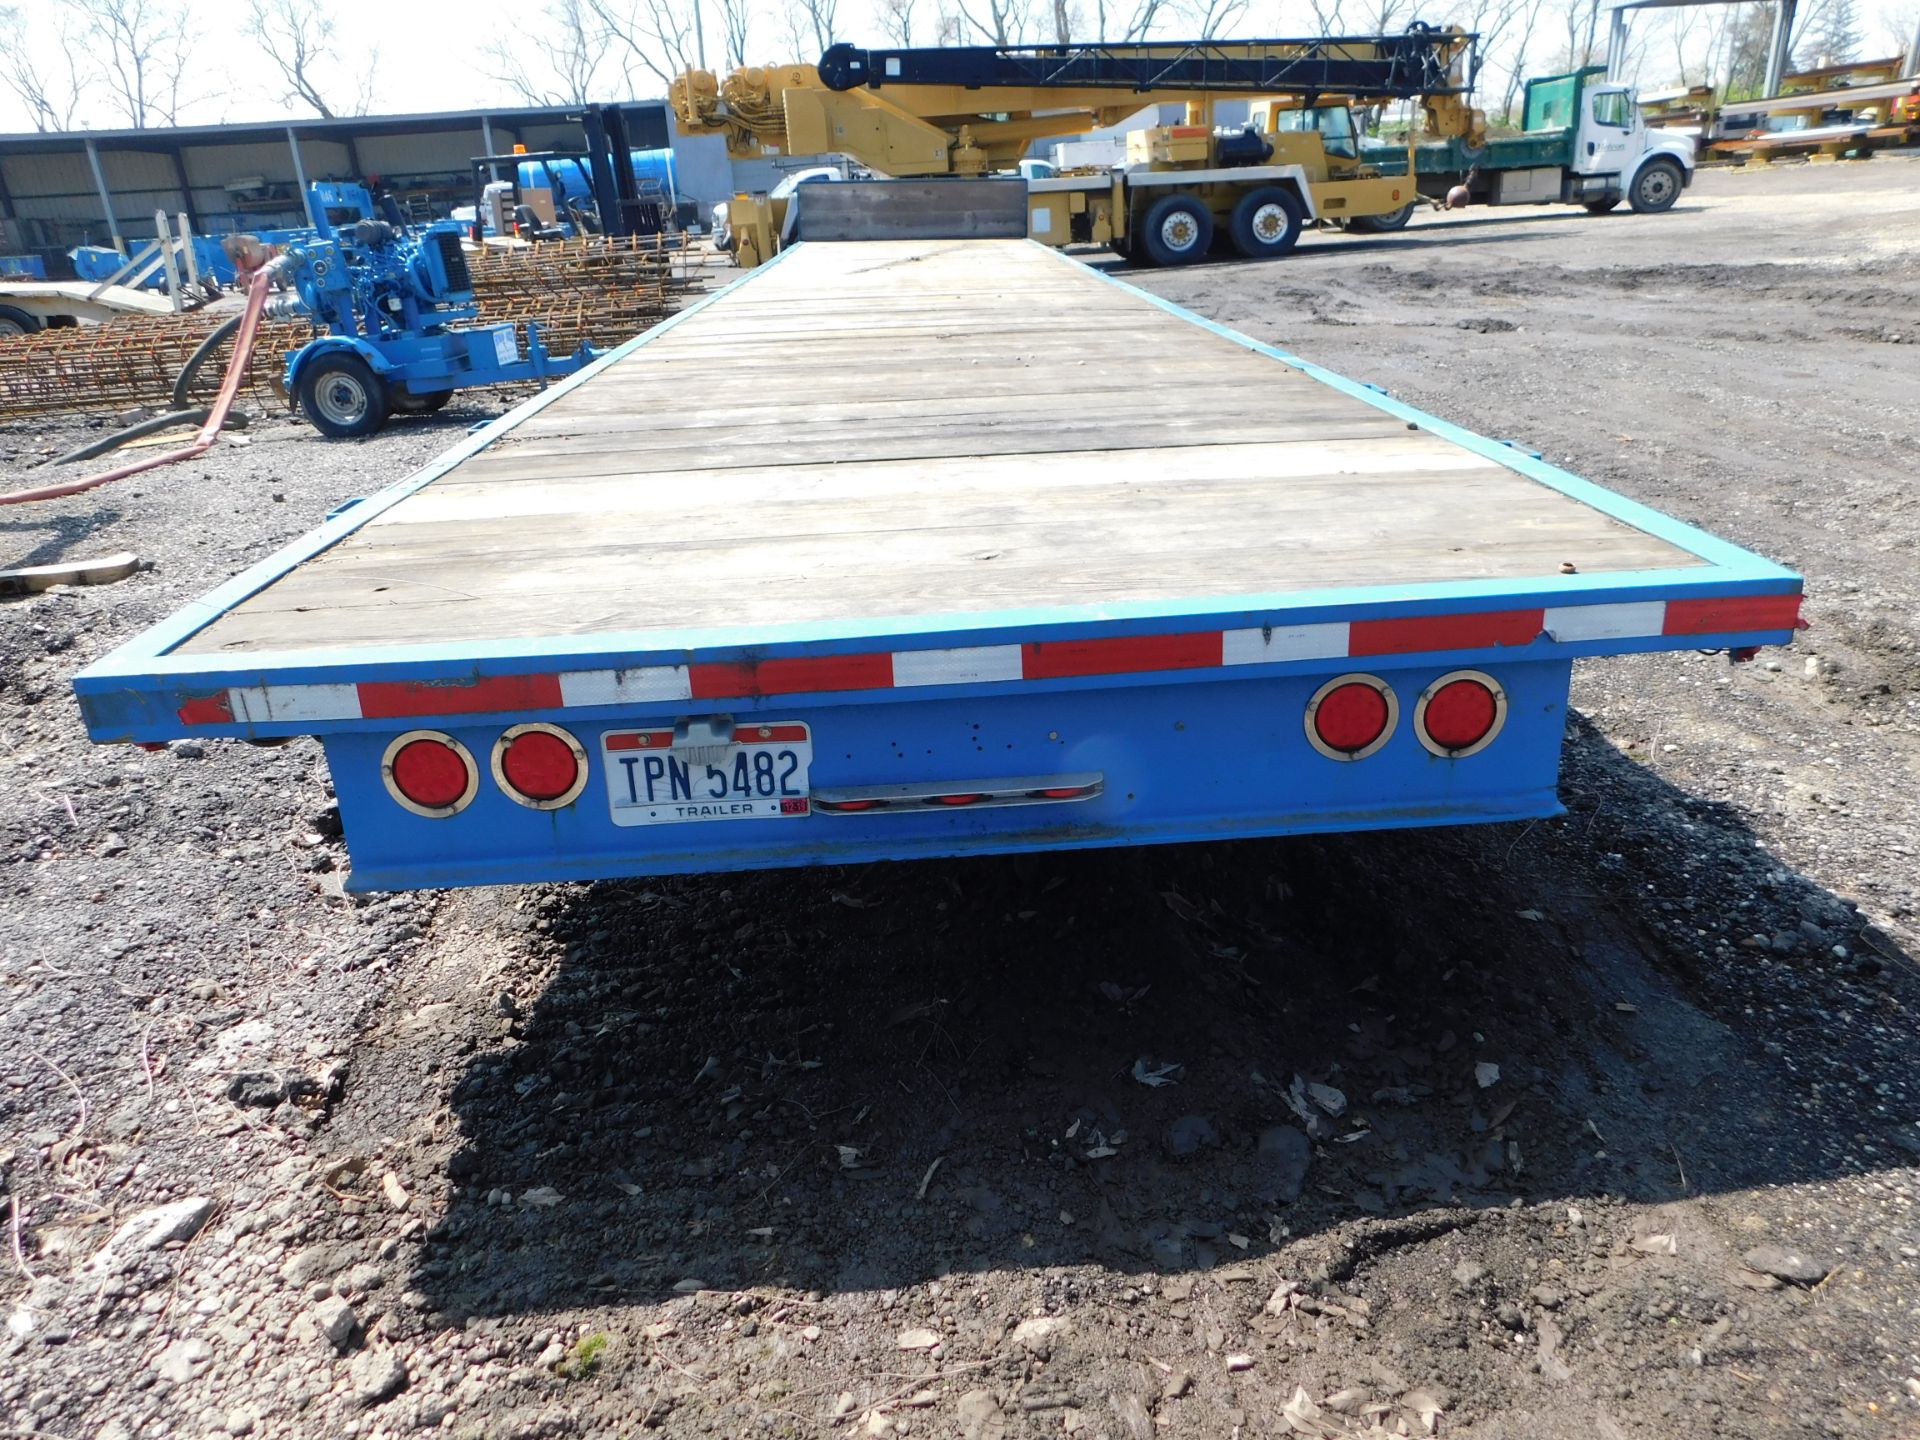 8' x 40' Flat Bed Tongue Pull Trailer, Wood Deck, Quad-Axle, 8-Wheels, Pintle Hitch - Image 5 of 11